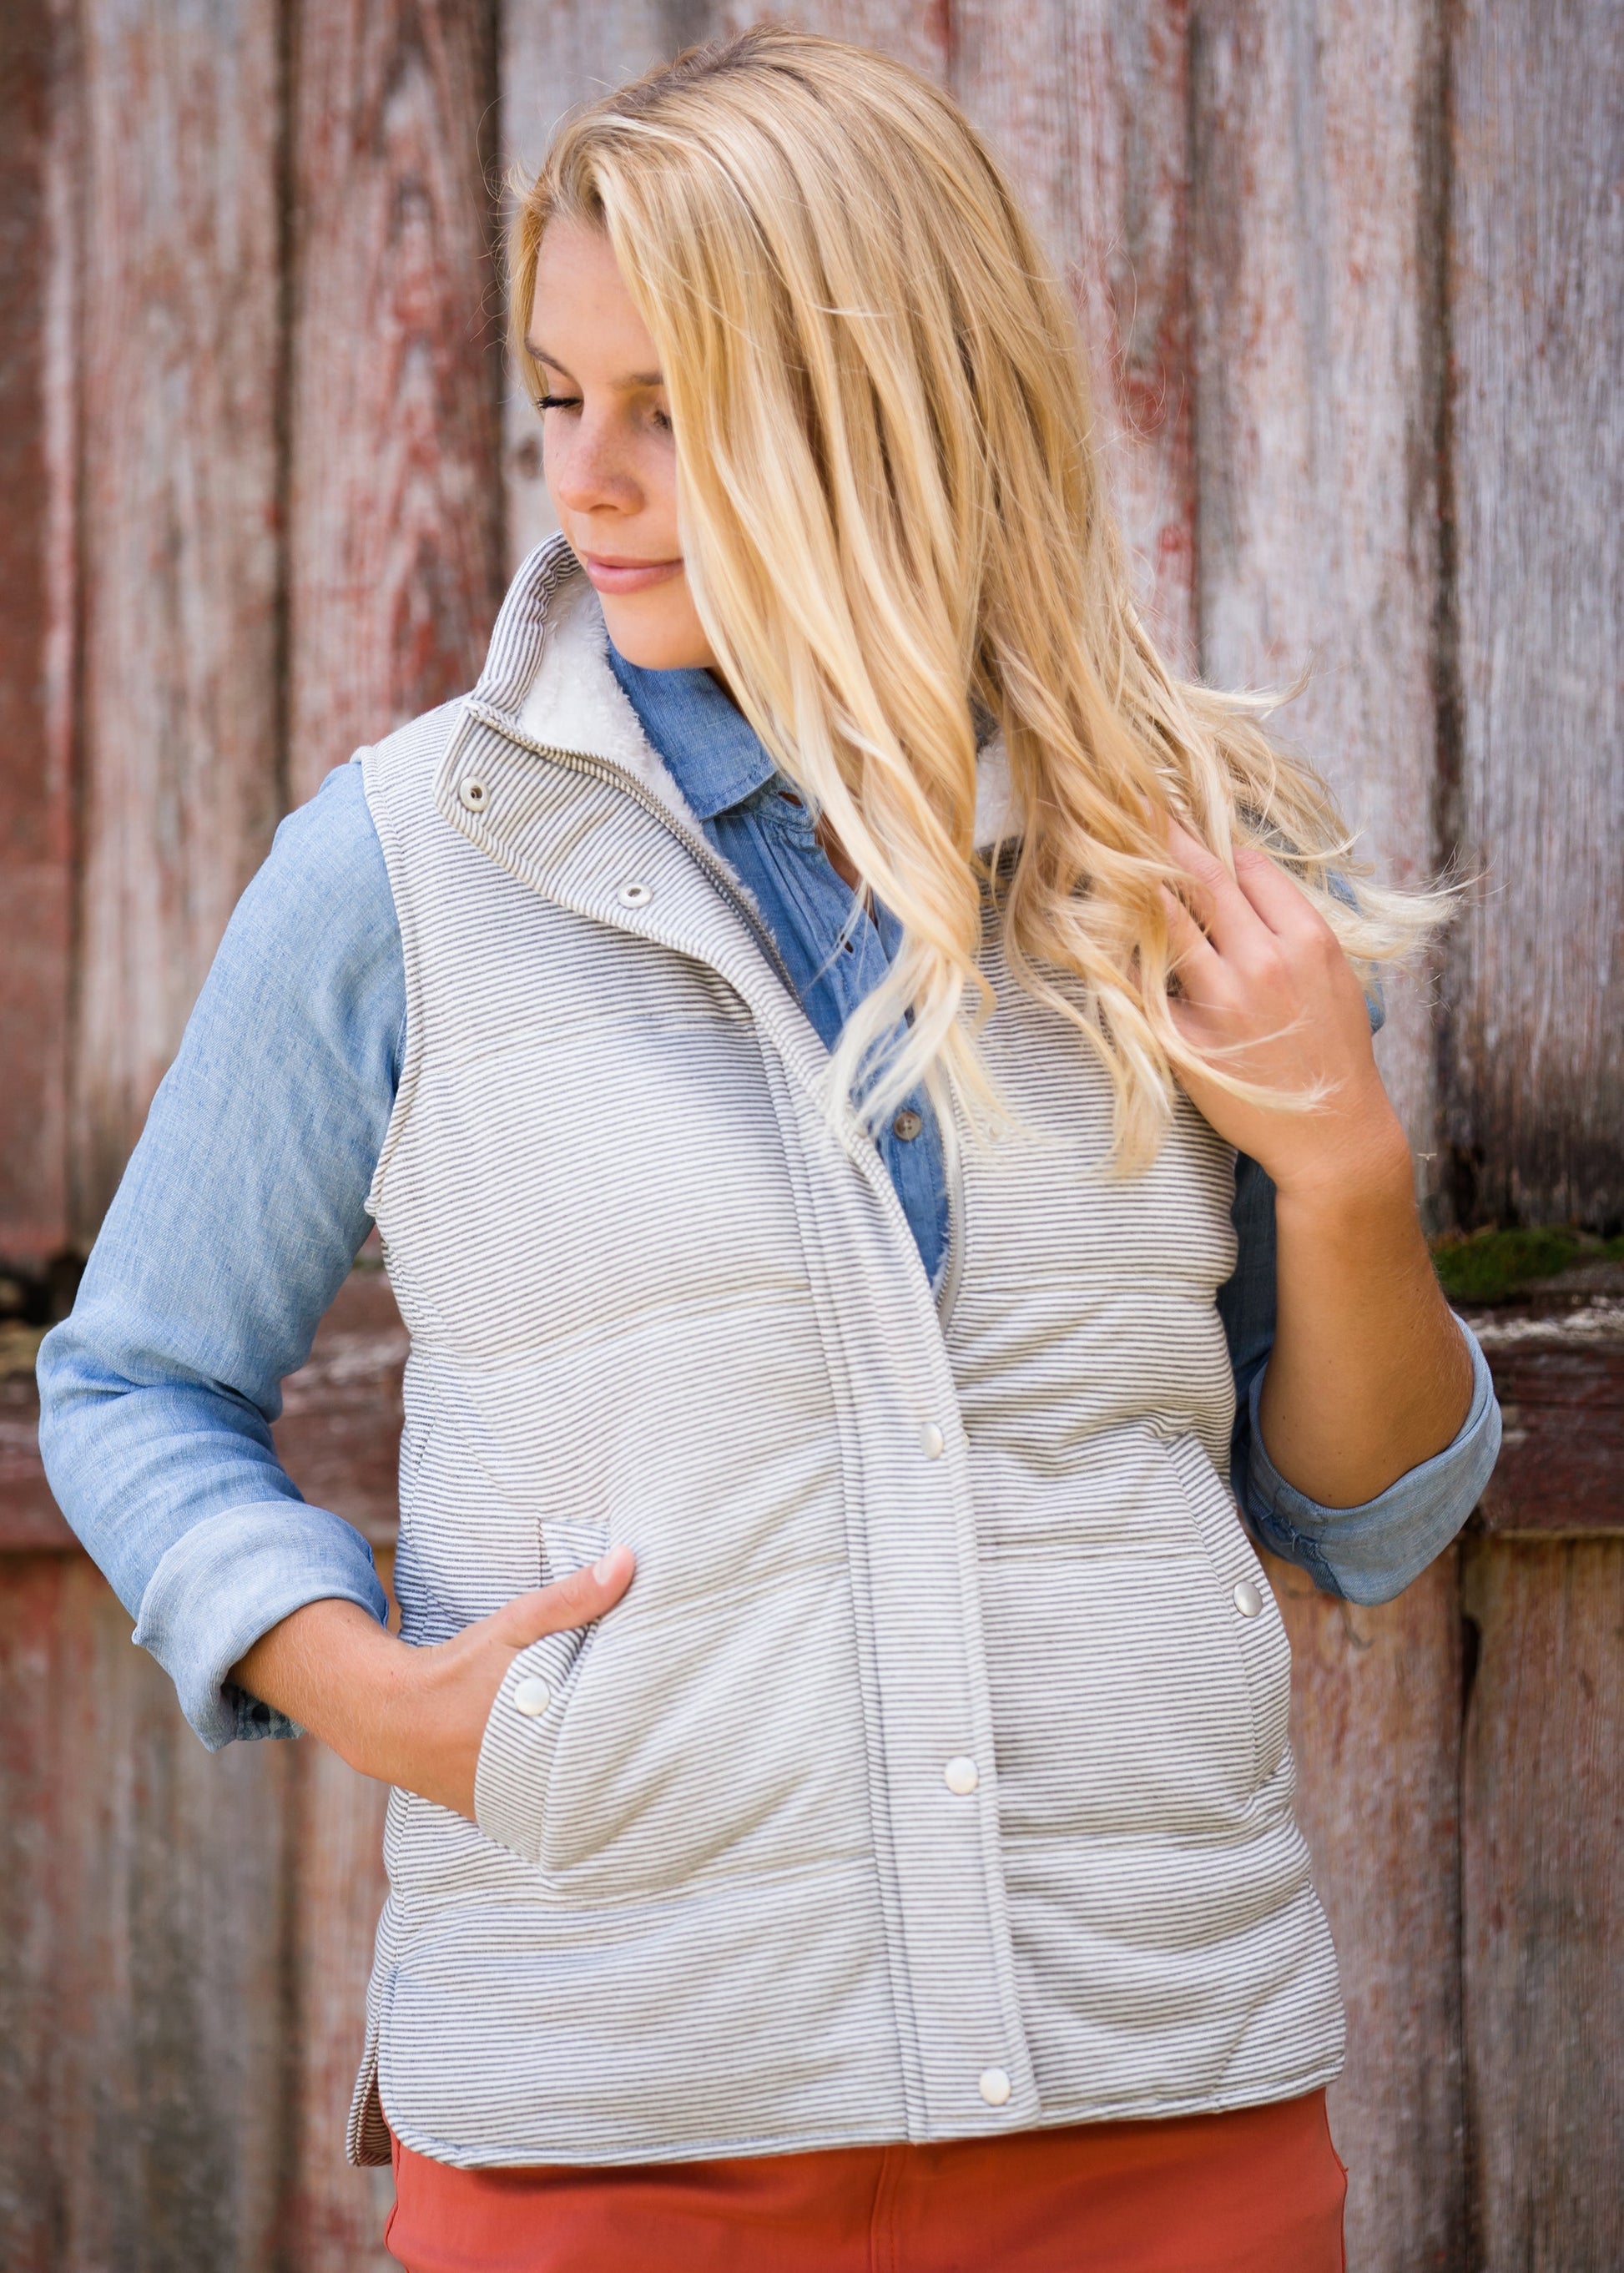 Pin Striped Sherpa Lined Vest